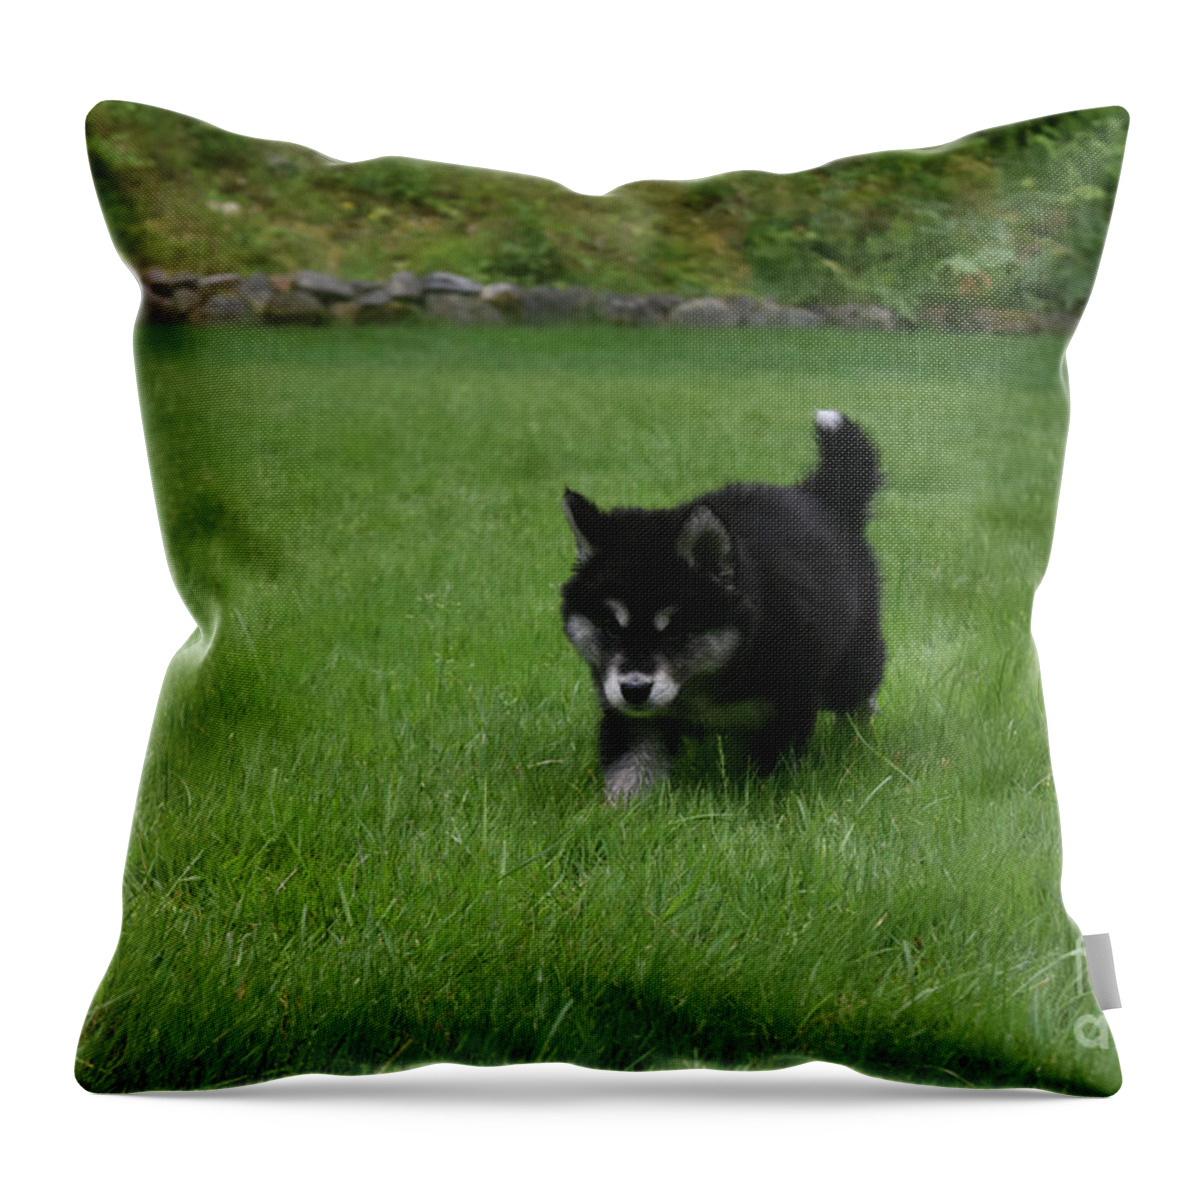 Alusky Throw Pillow featuring the photograph Black and White Alusky Puppy Walking in a Grass Yard by DejaVu Designs